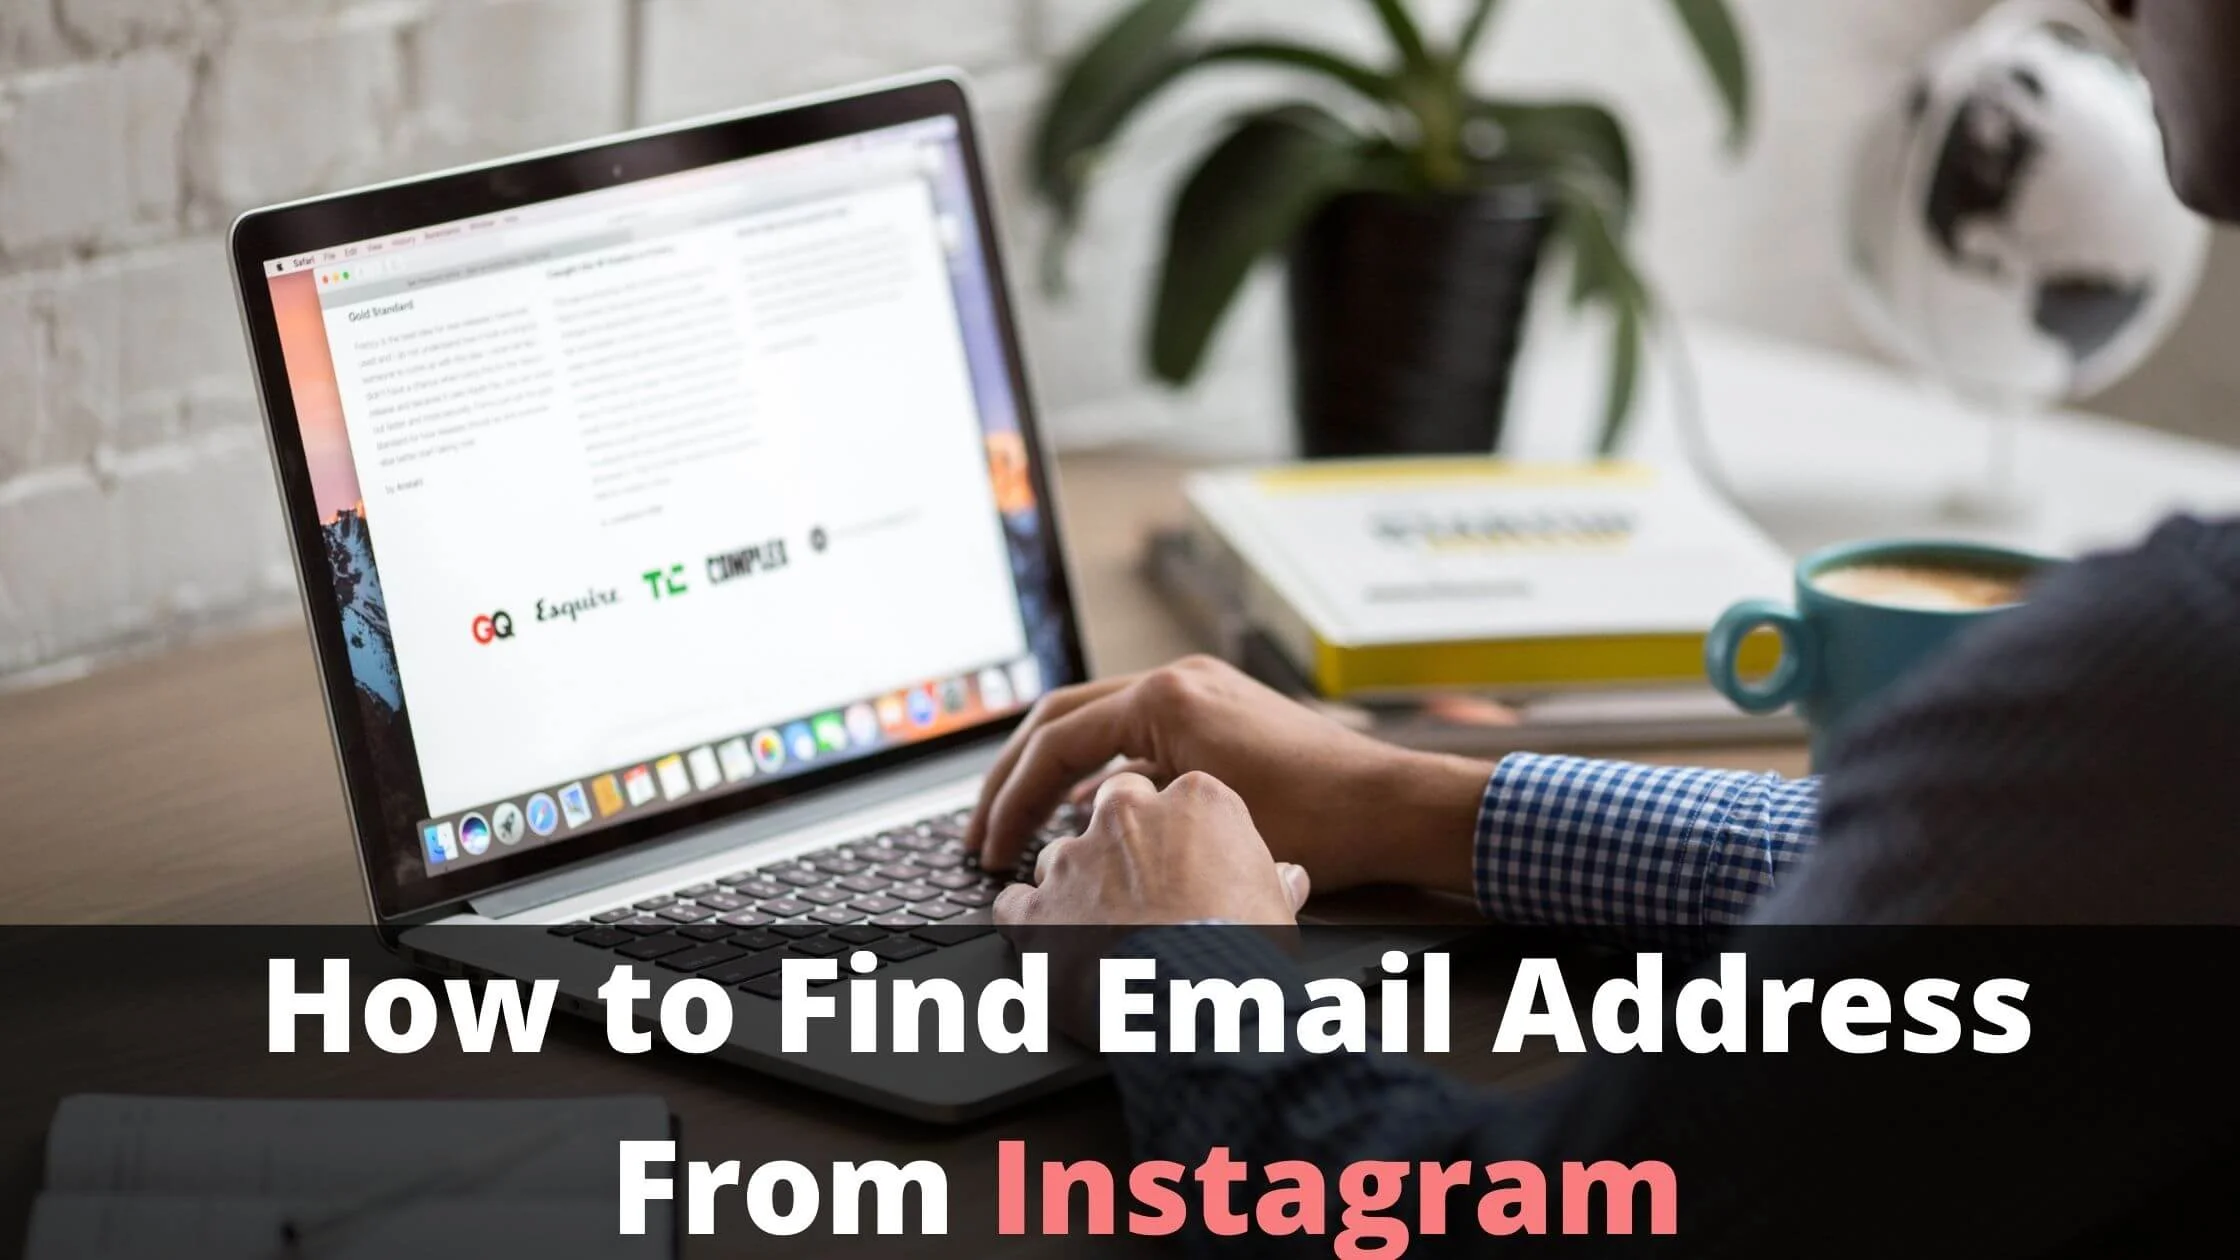 How to Find Email Address From Instagram